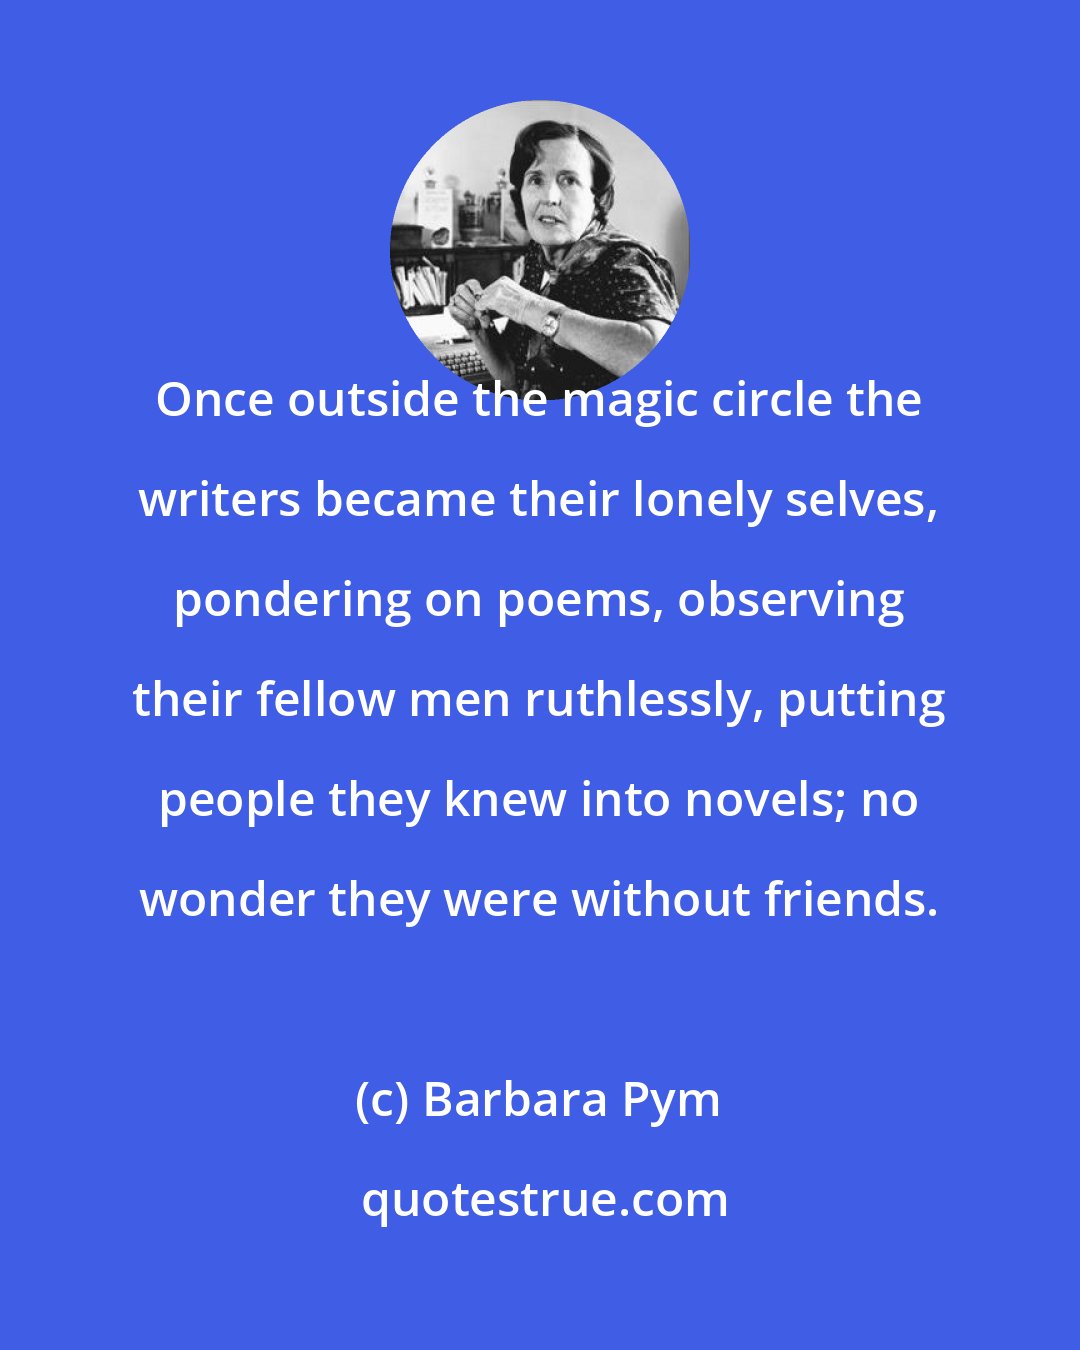 Barbara Pym: Once outside the magic circle the writers became their lonely selves, pondering on poems, observing their fellow men ruthlessly, putting people they knew into novels; no wonder they were without friends.